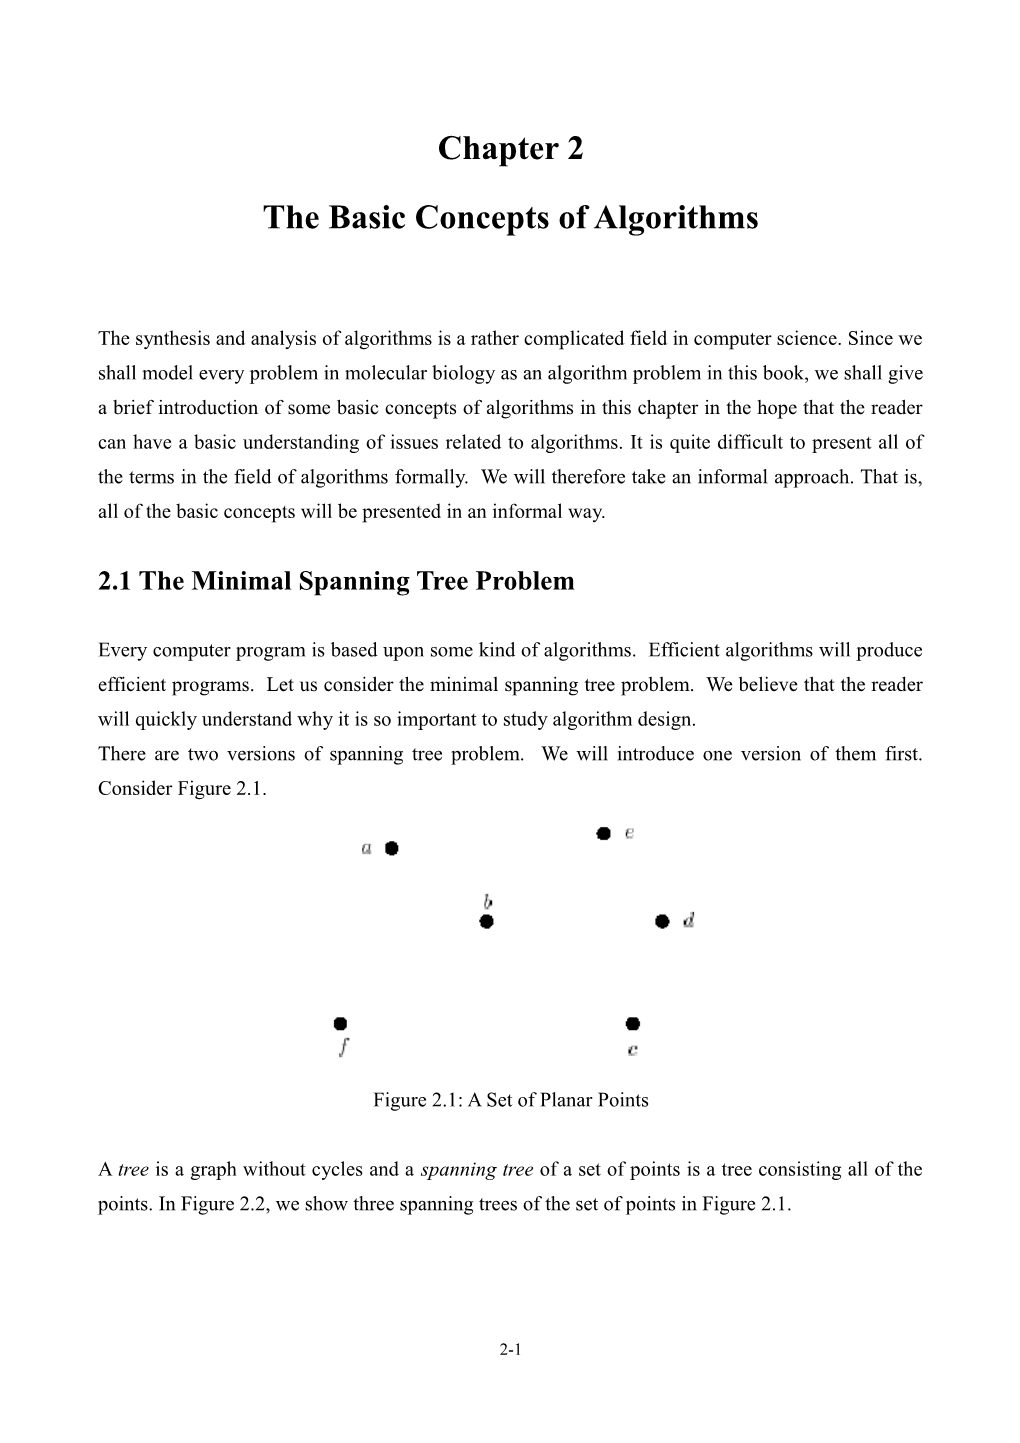 The Basic Concepts of Algorithms